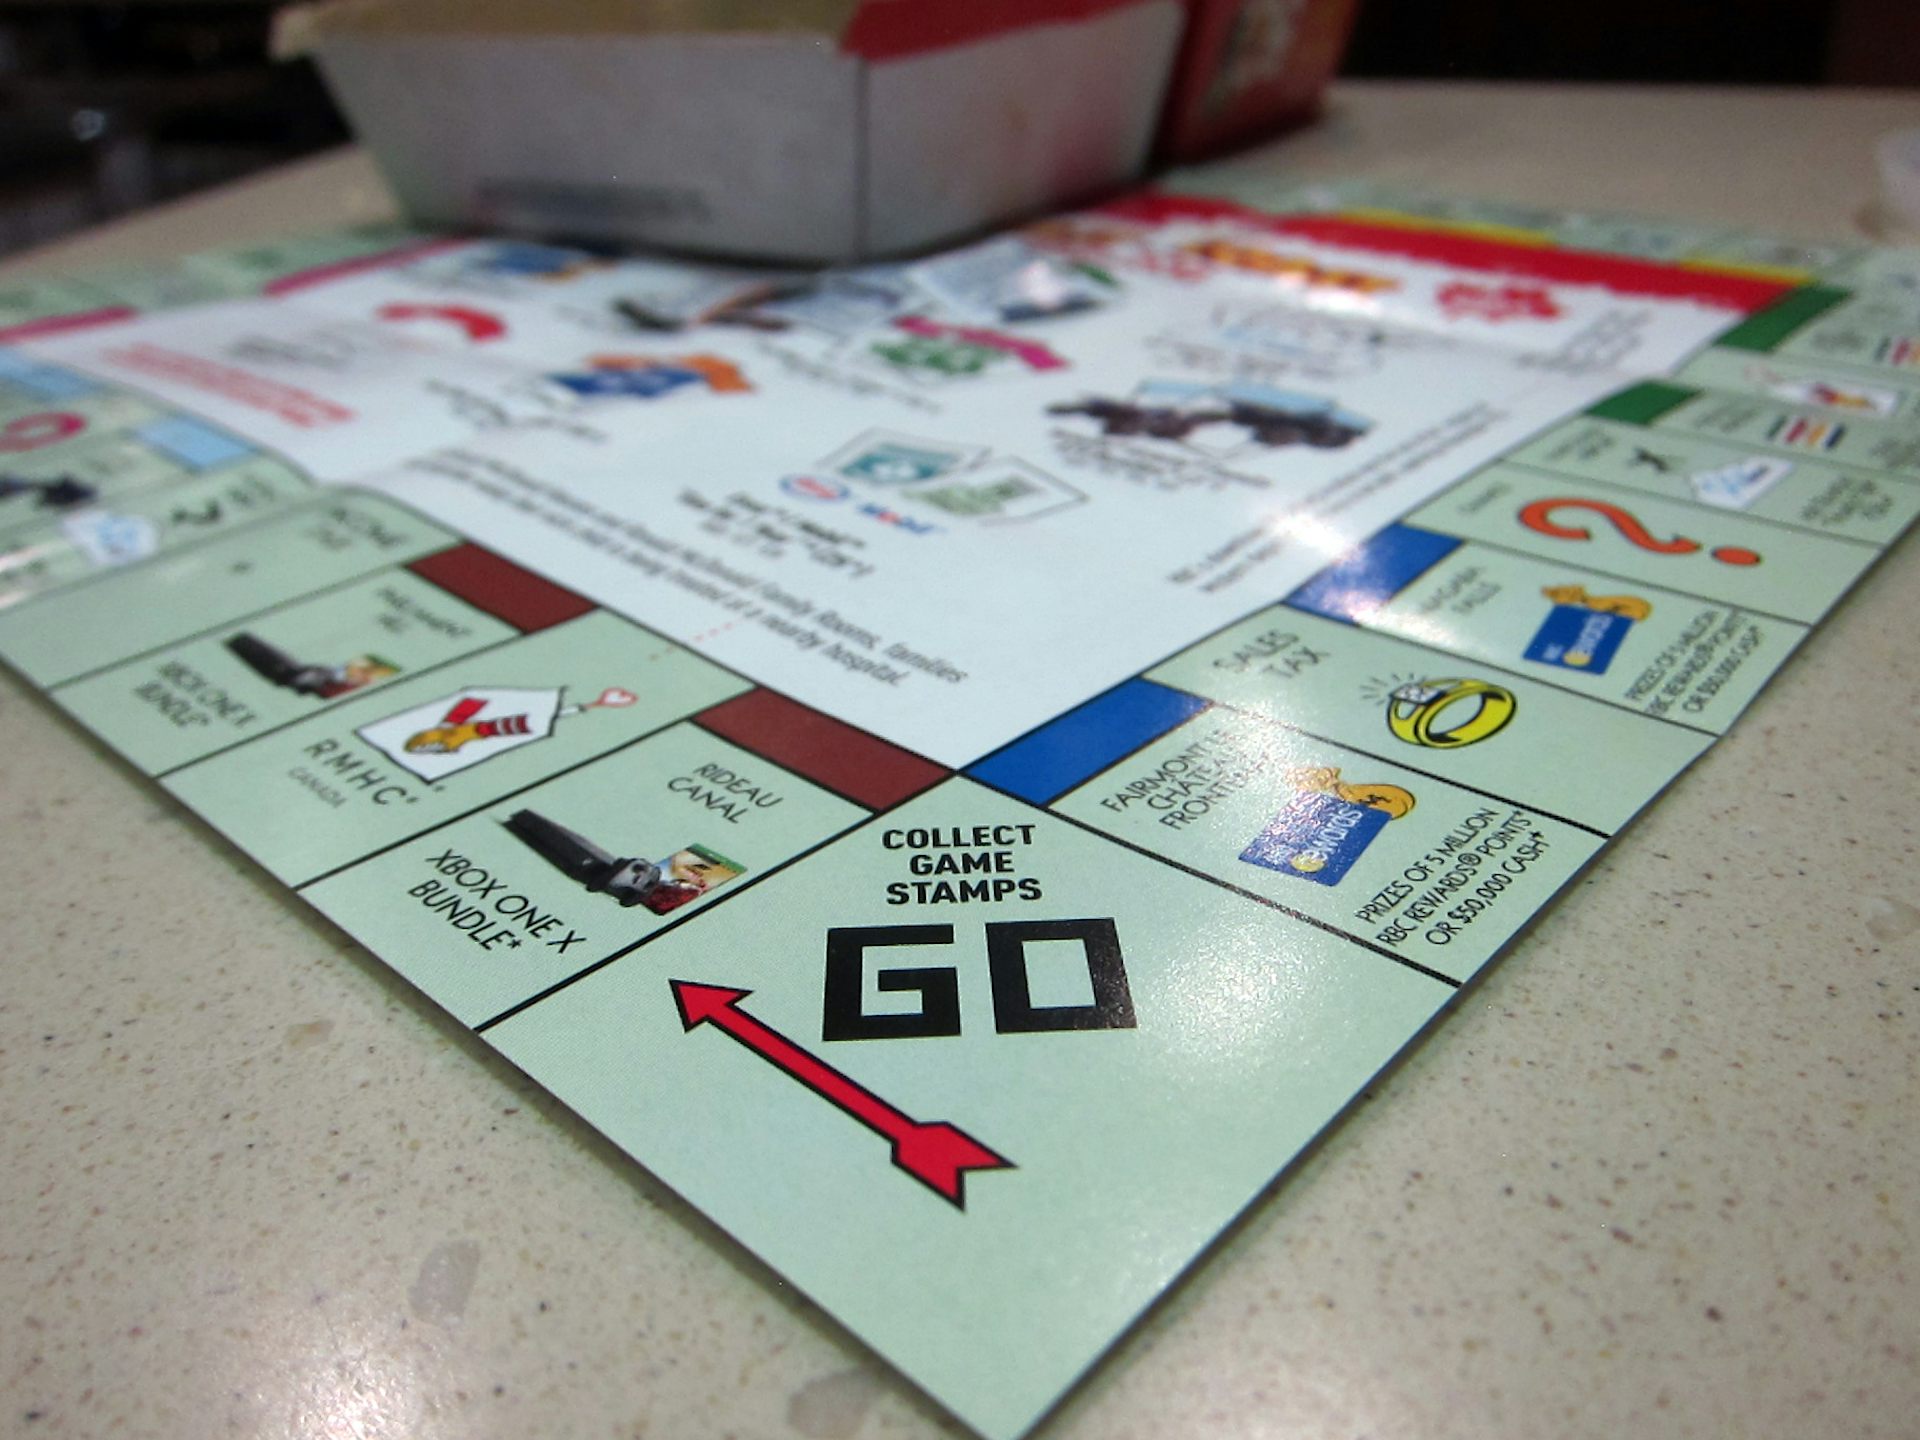 the mcdonald’s monopoly game is an example of which type of promotion? quizlet marketing